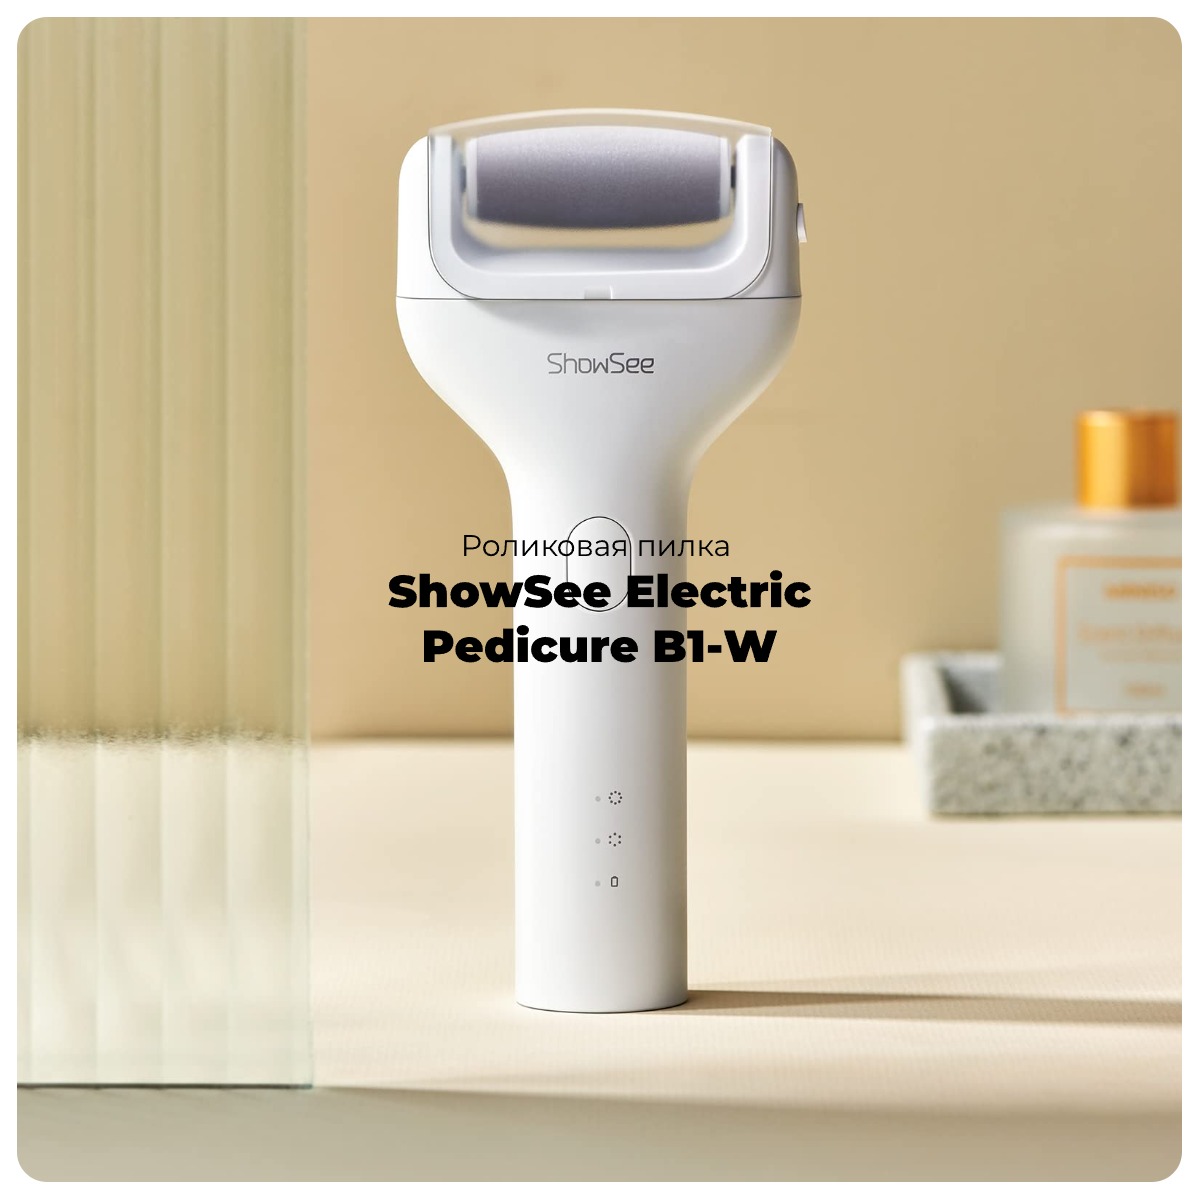 ShowSee-Electric-Pedicure-B1-W-01